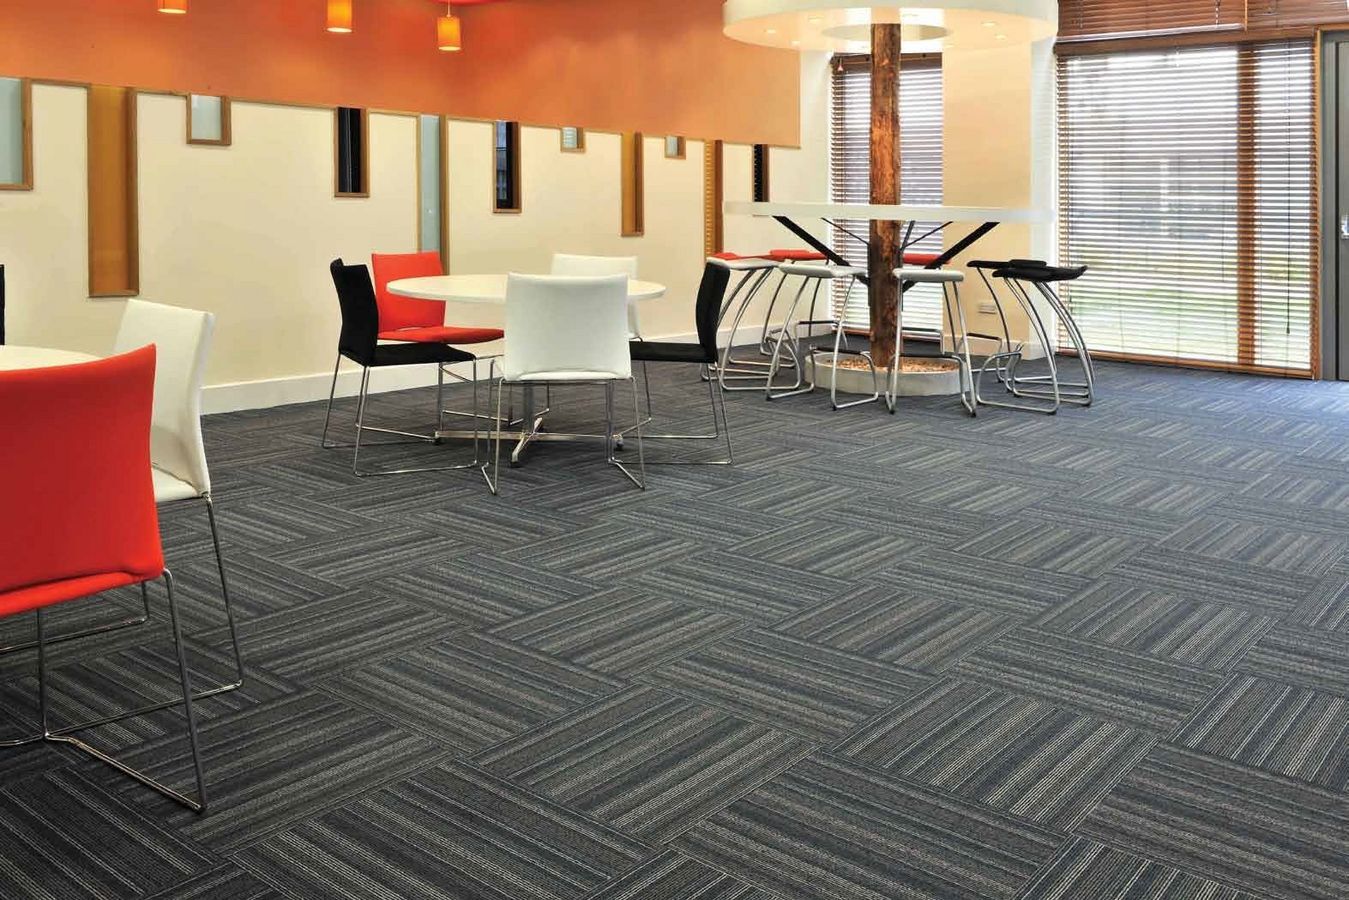 industrial carpet tiles 7 tips to maintain your office carpet tiles #office #carpet LPDCVNV